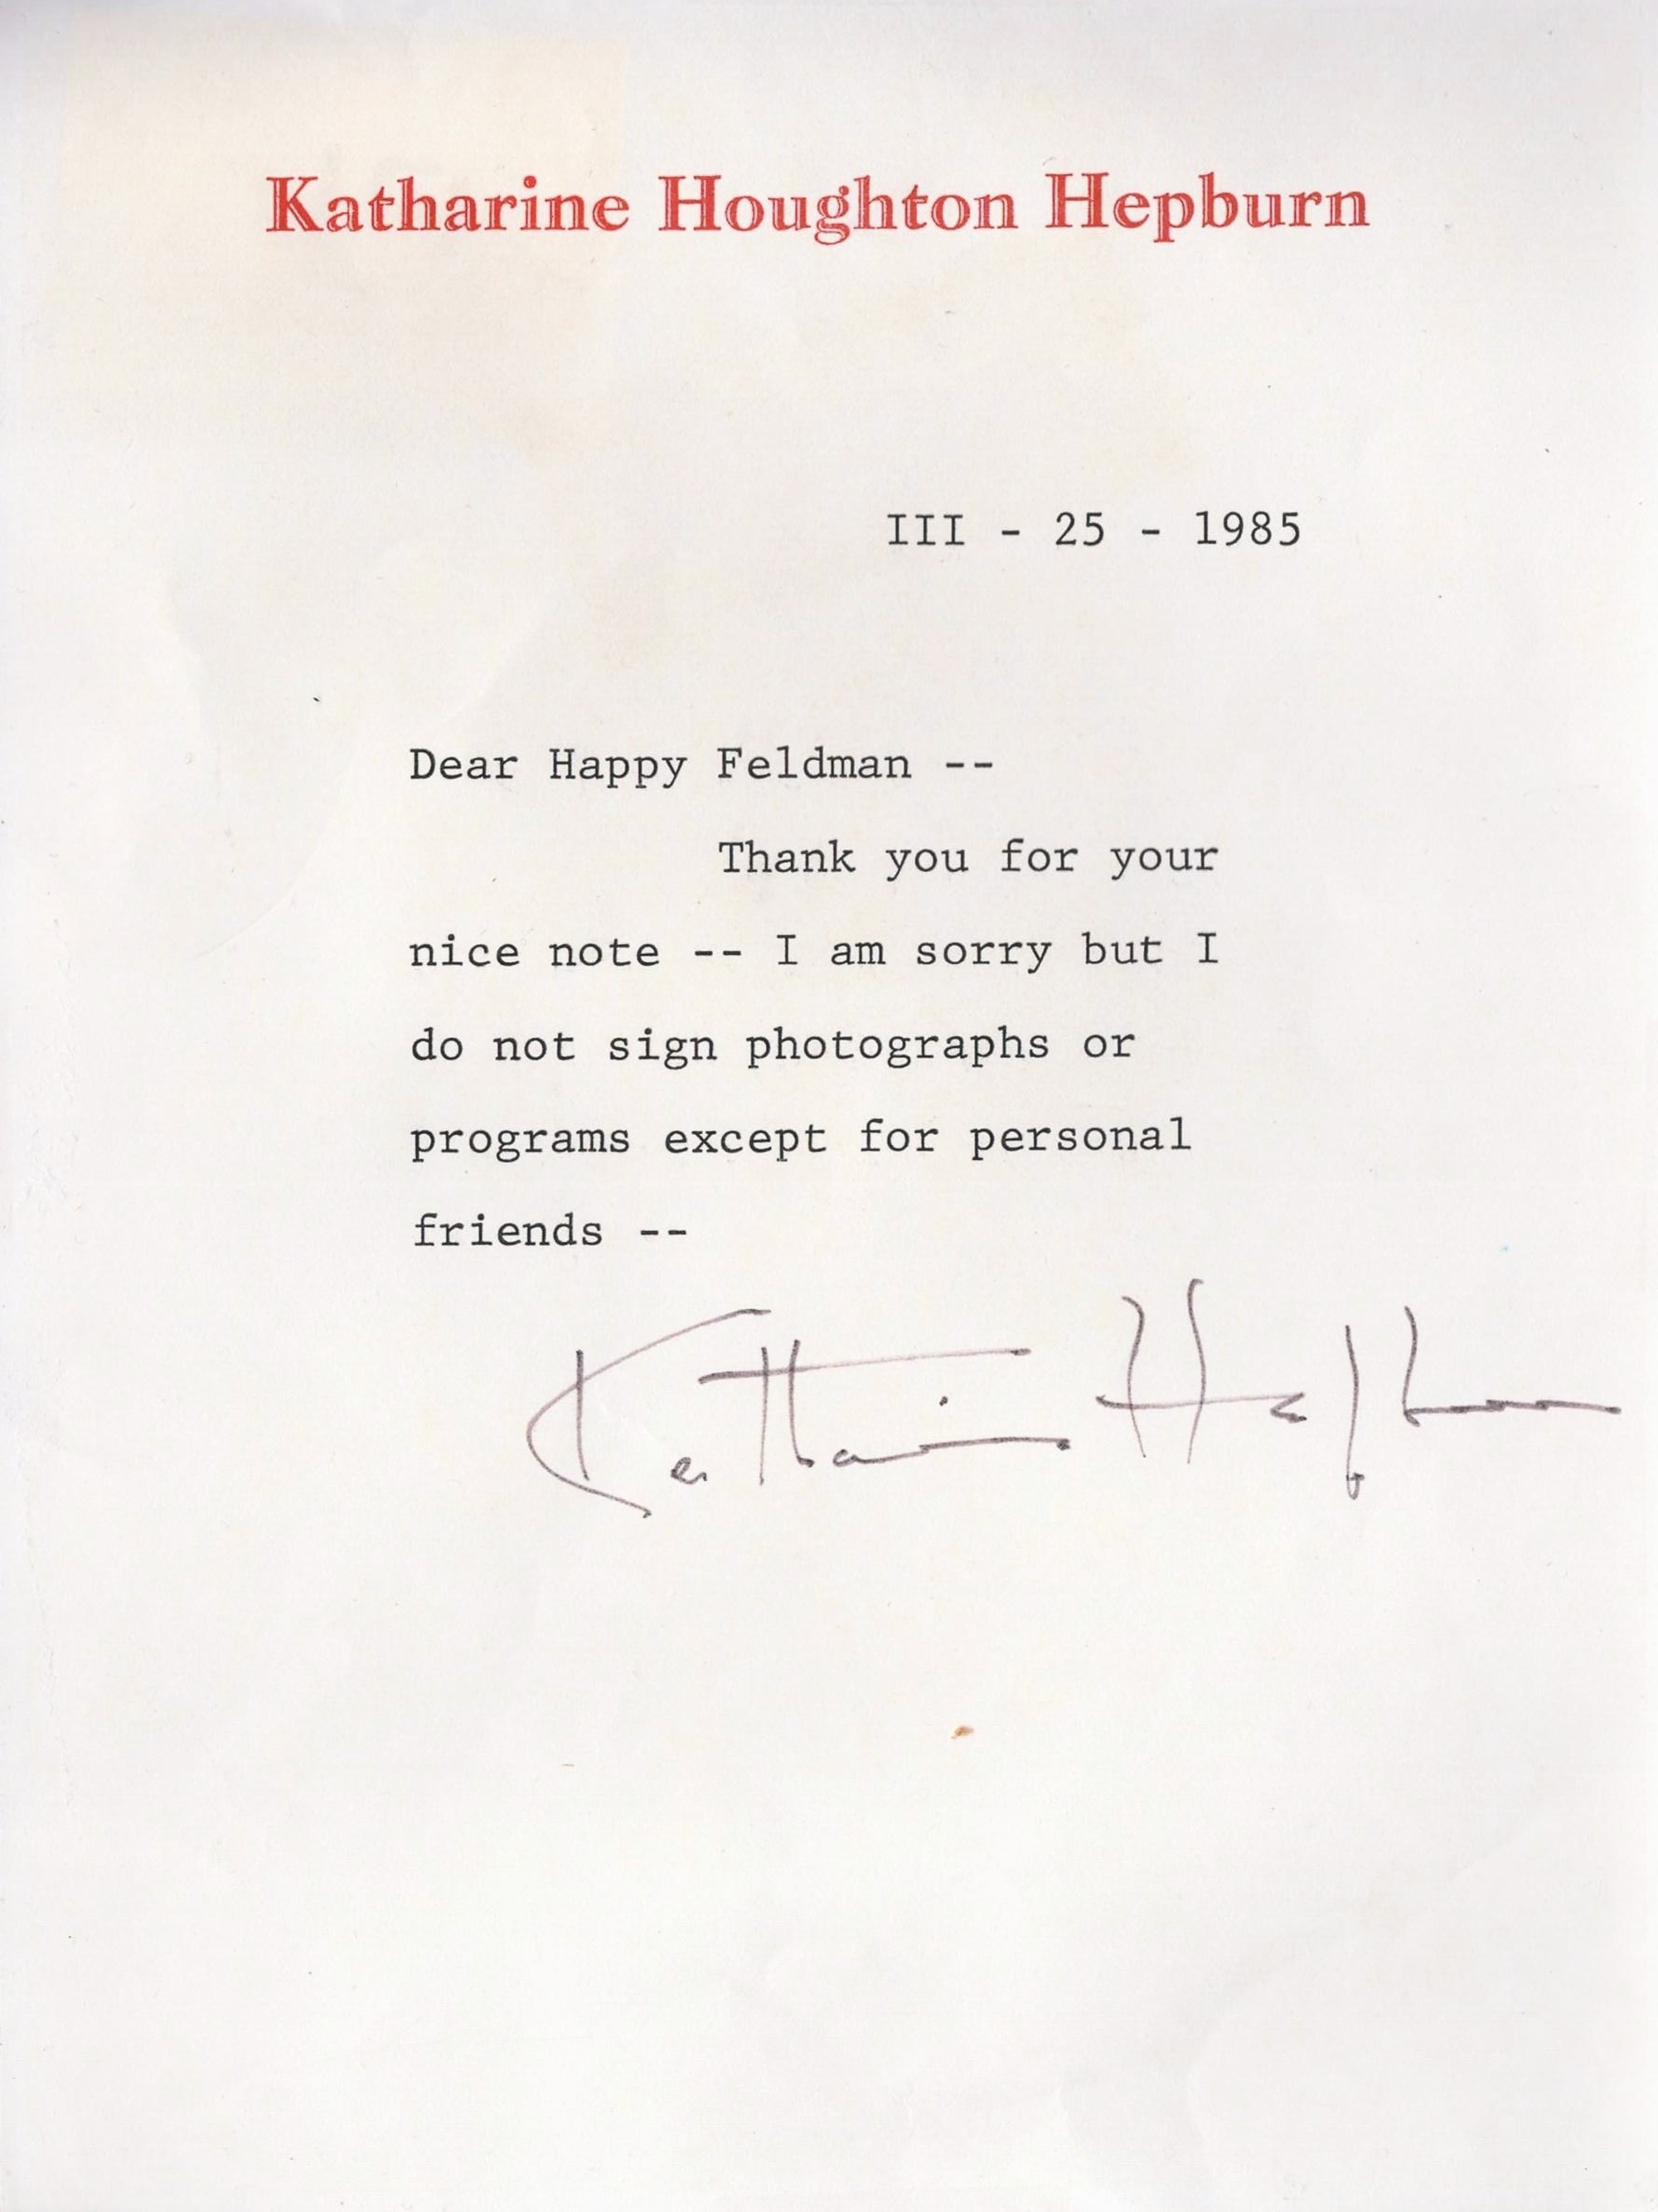 Actor, Katharine Hepburn TLS dated 25th March 1985. This lovely letter is on headed paper and is